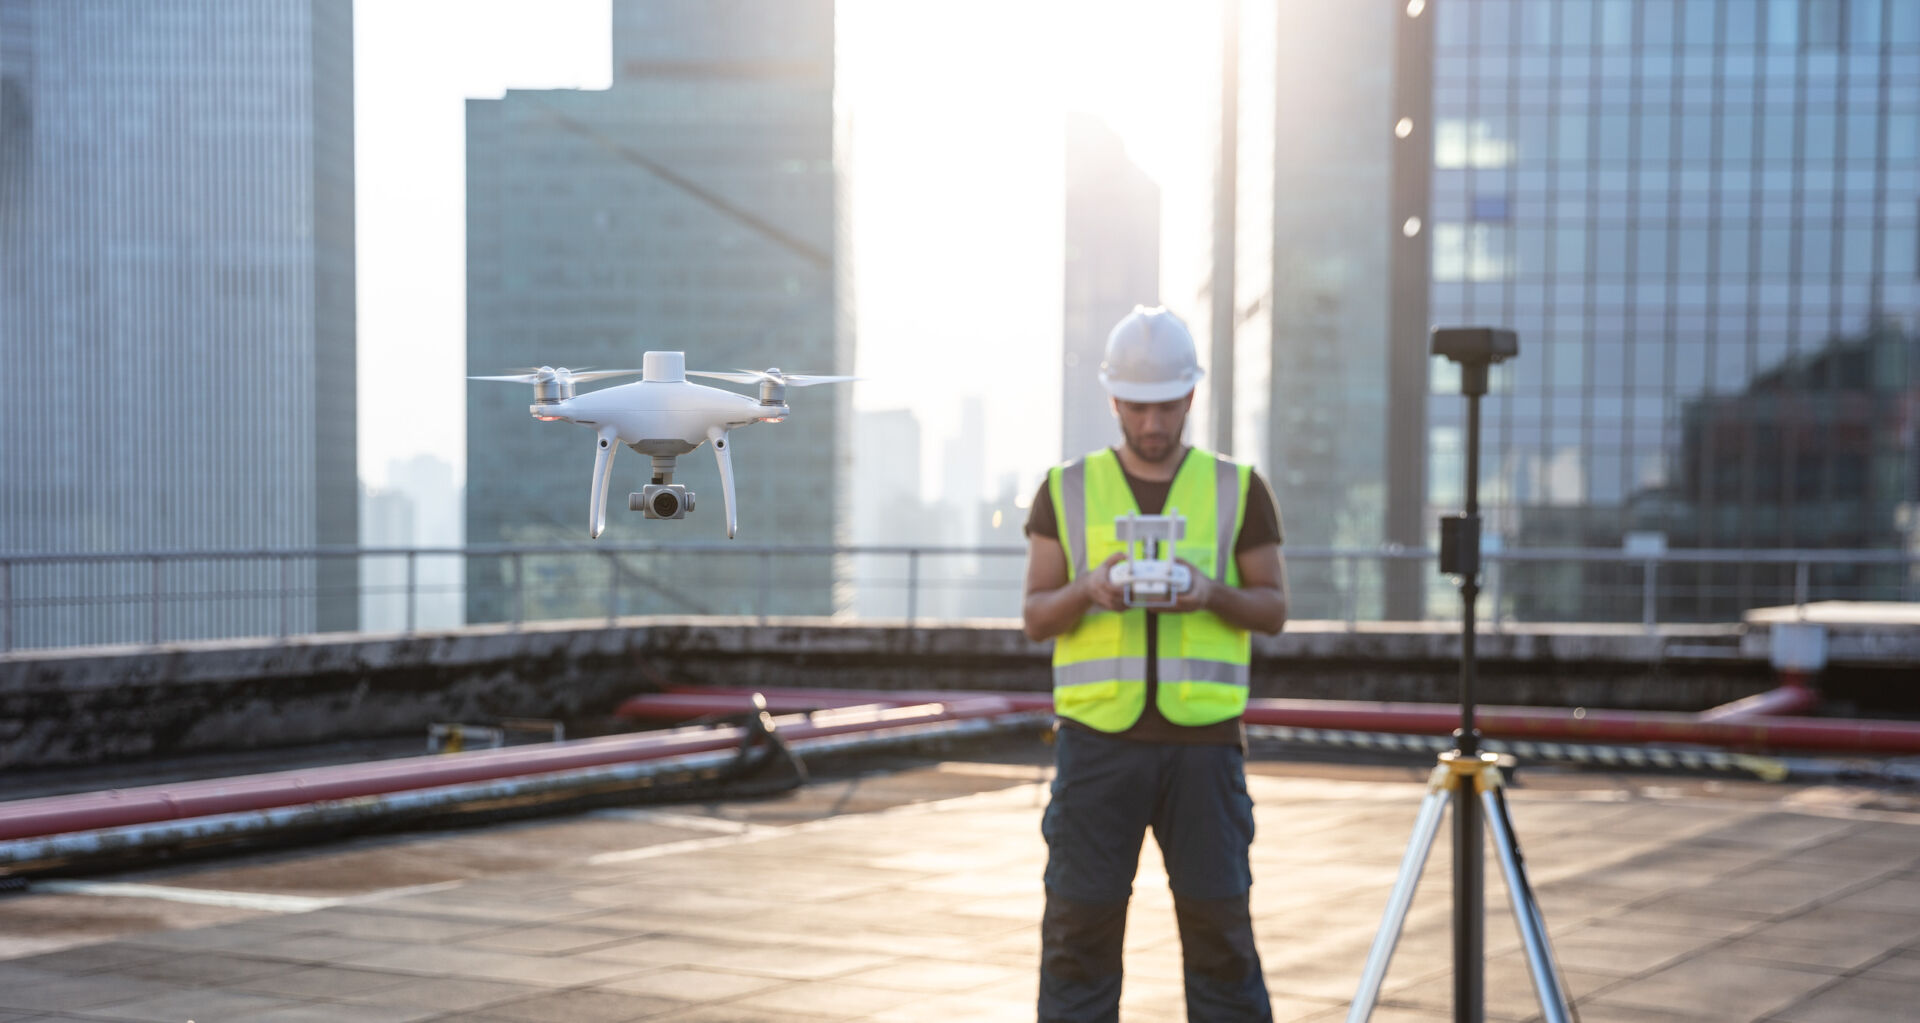 Worker using P4 RTK drone on rooftop during a surveying job or project in big city